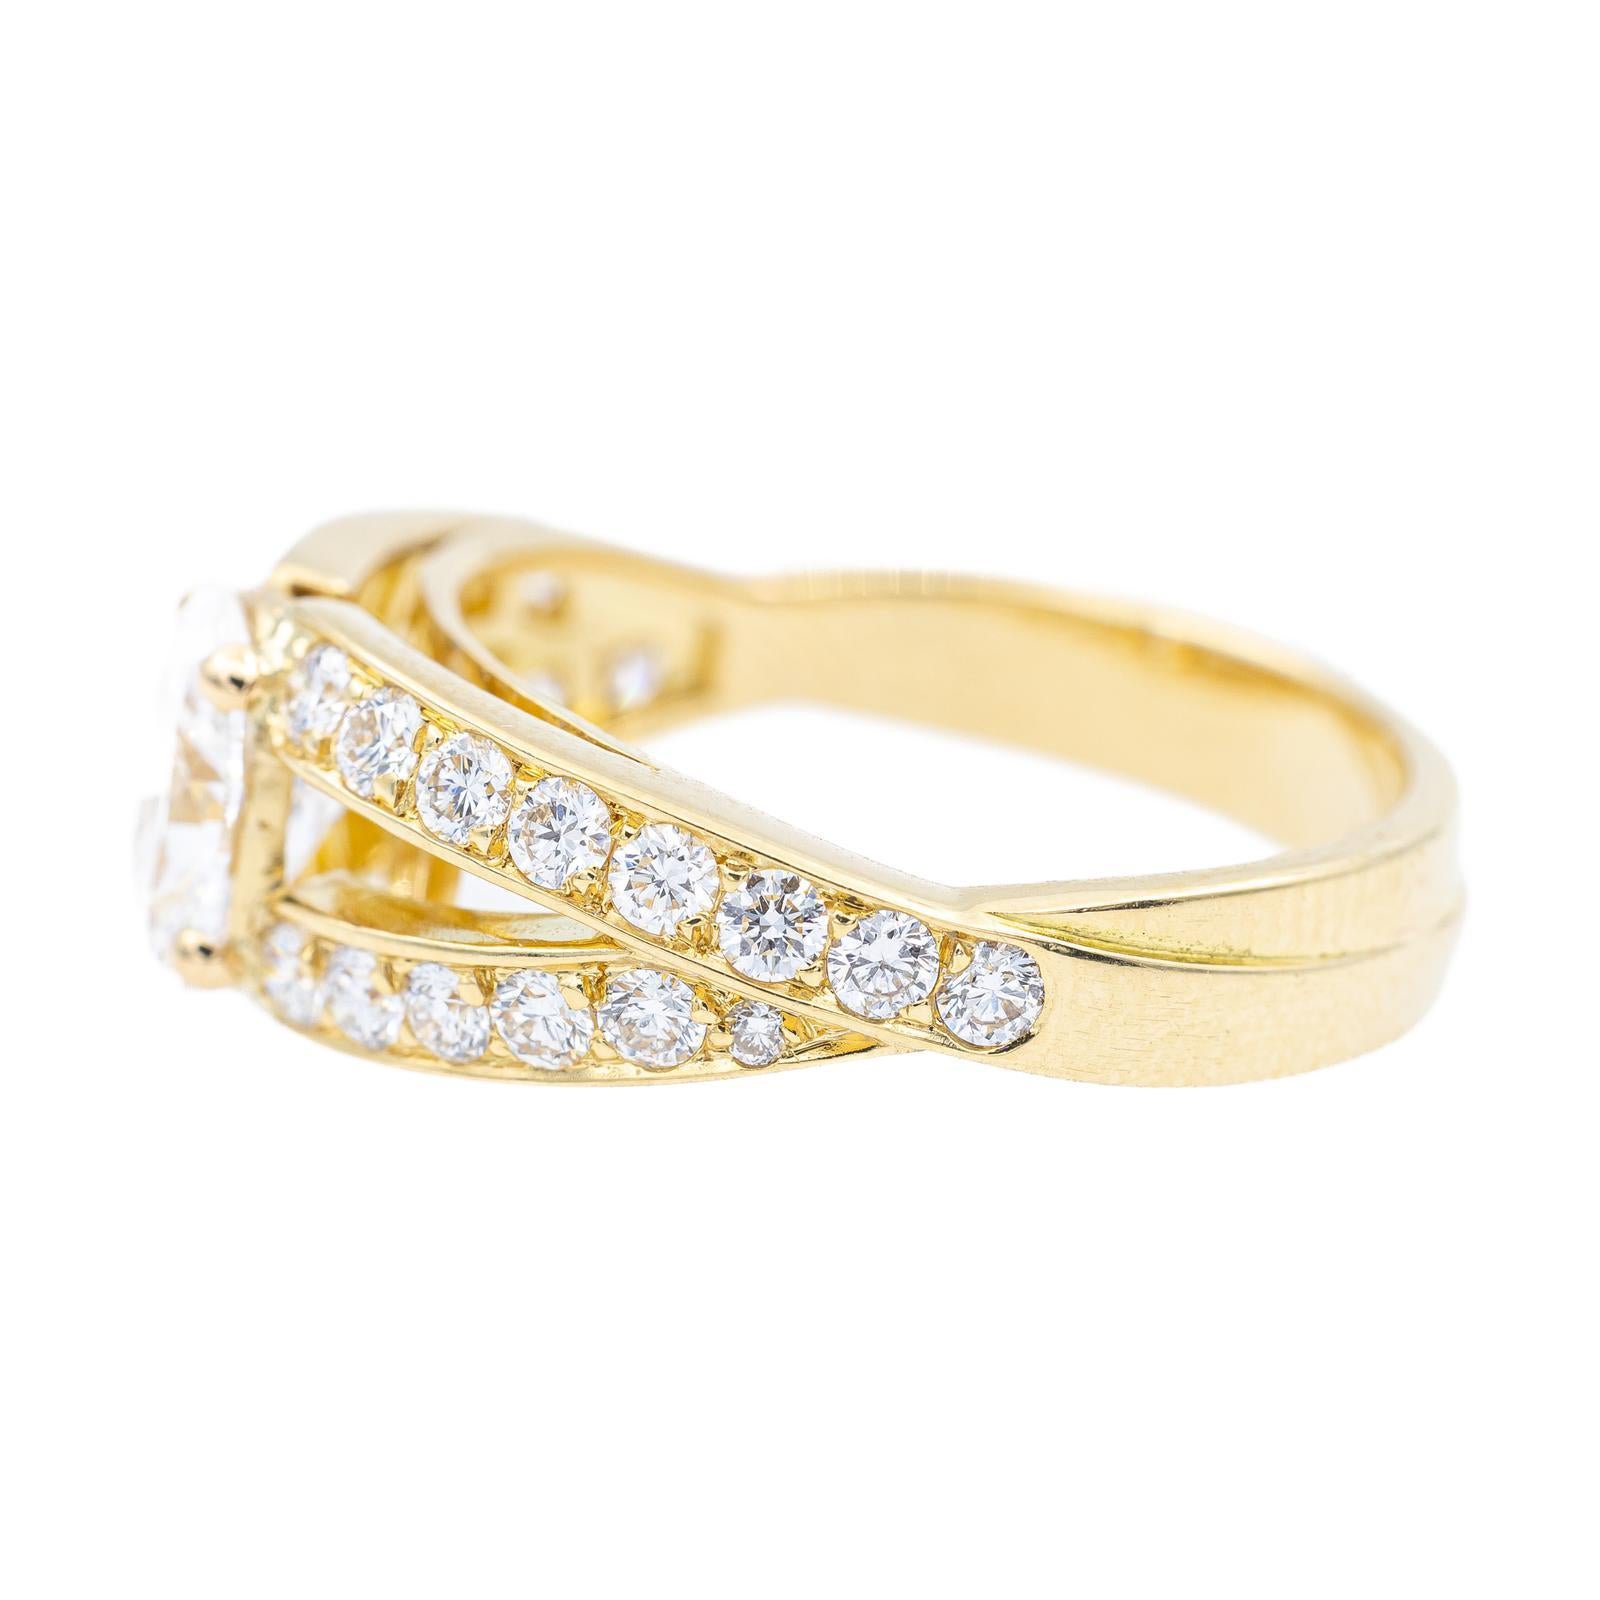 Mellerio Ring Yellow Gold Diamond For Sale 4